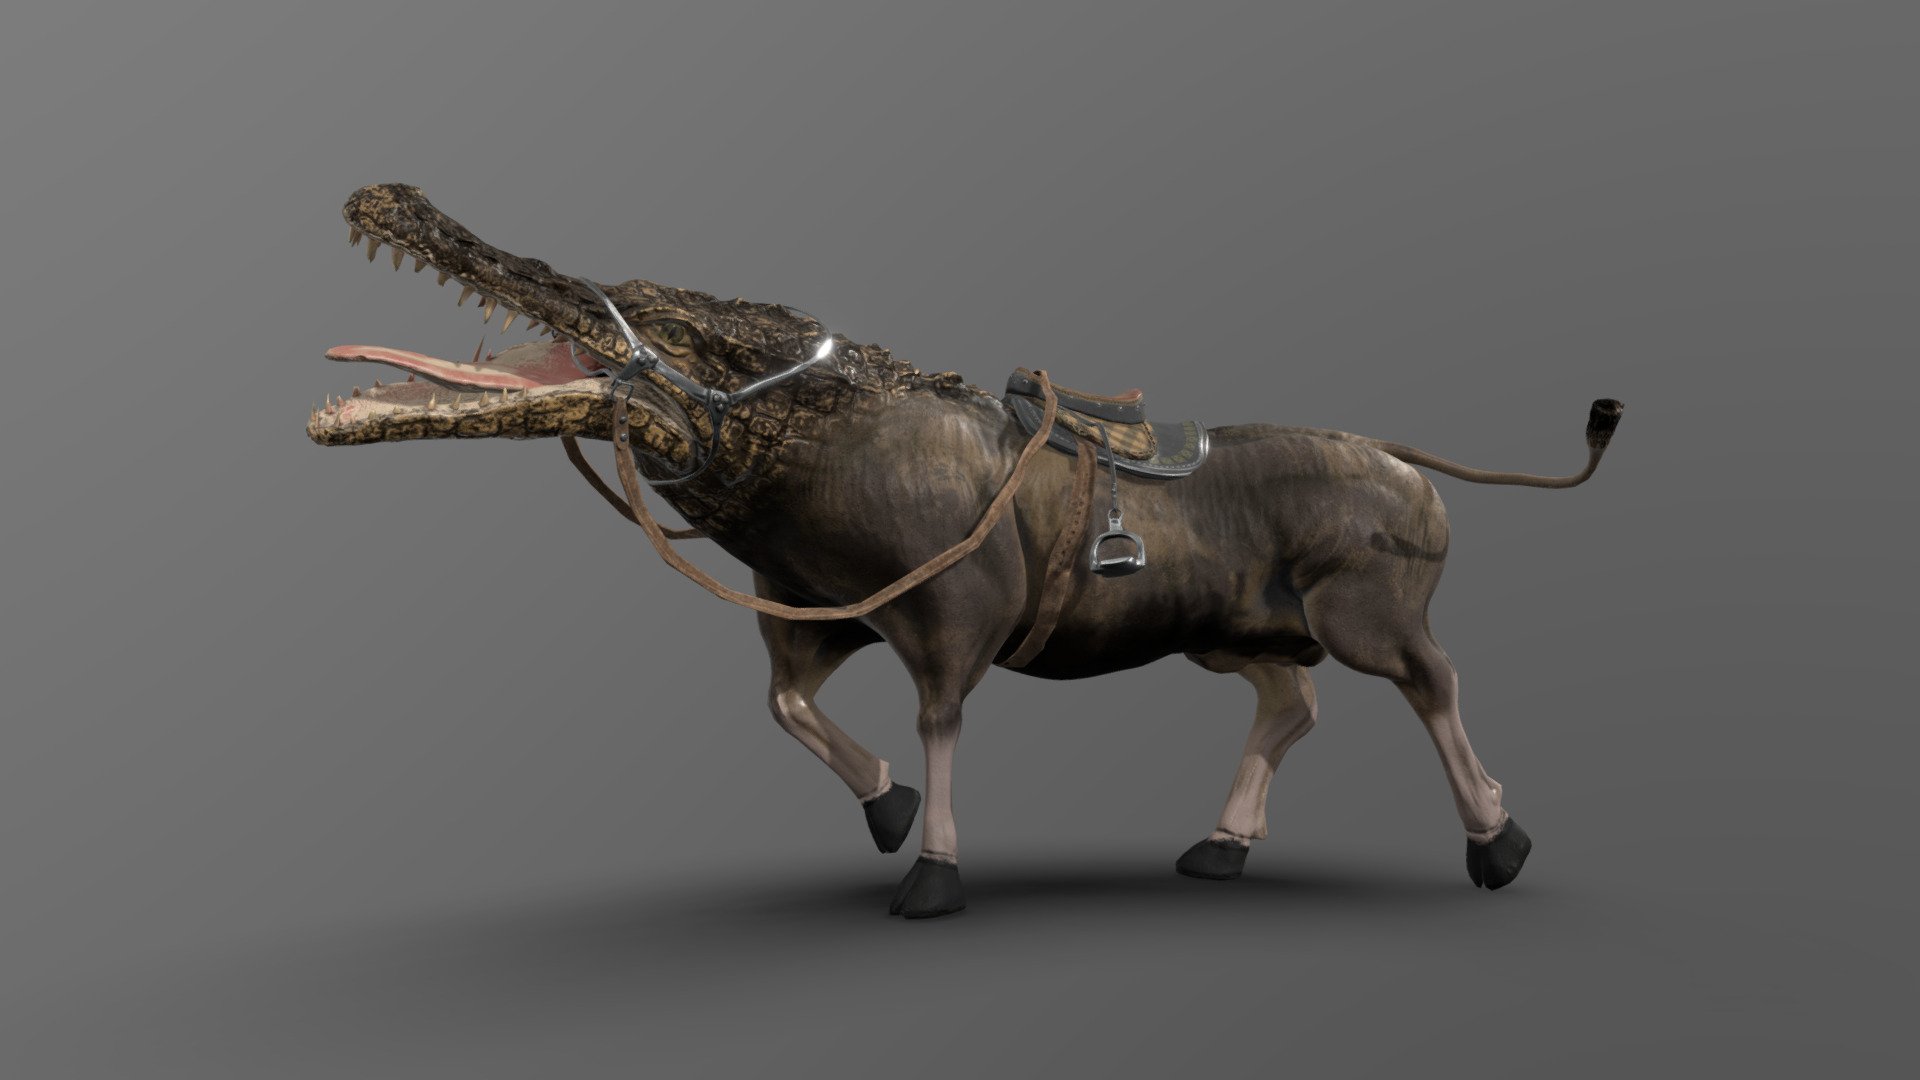 I made this fictional animal for the practice work in sculpting and rigging 3d model